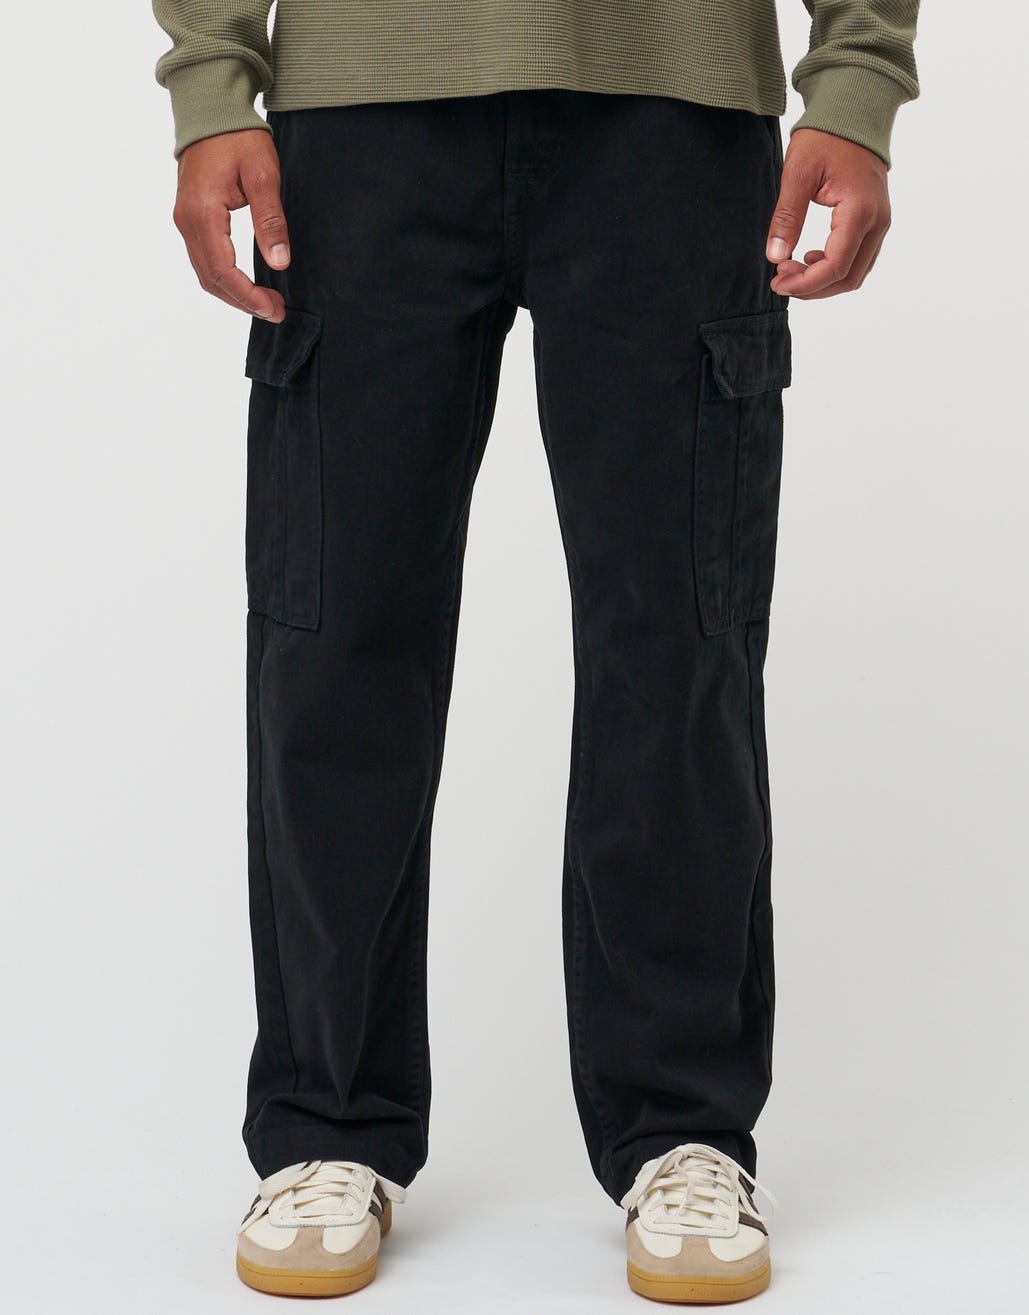 Looking for baggy cargo pants similar to these : r/findfashion